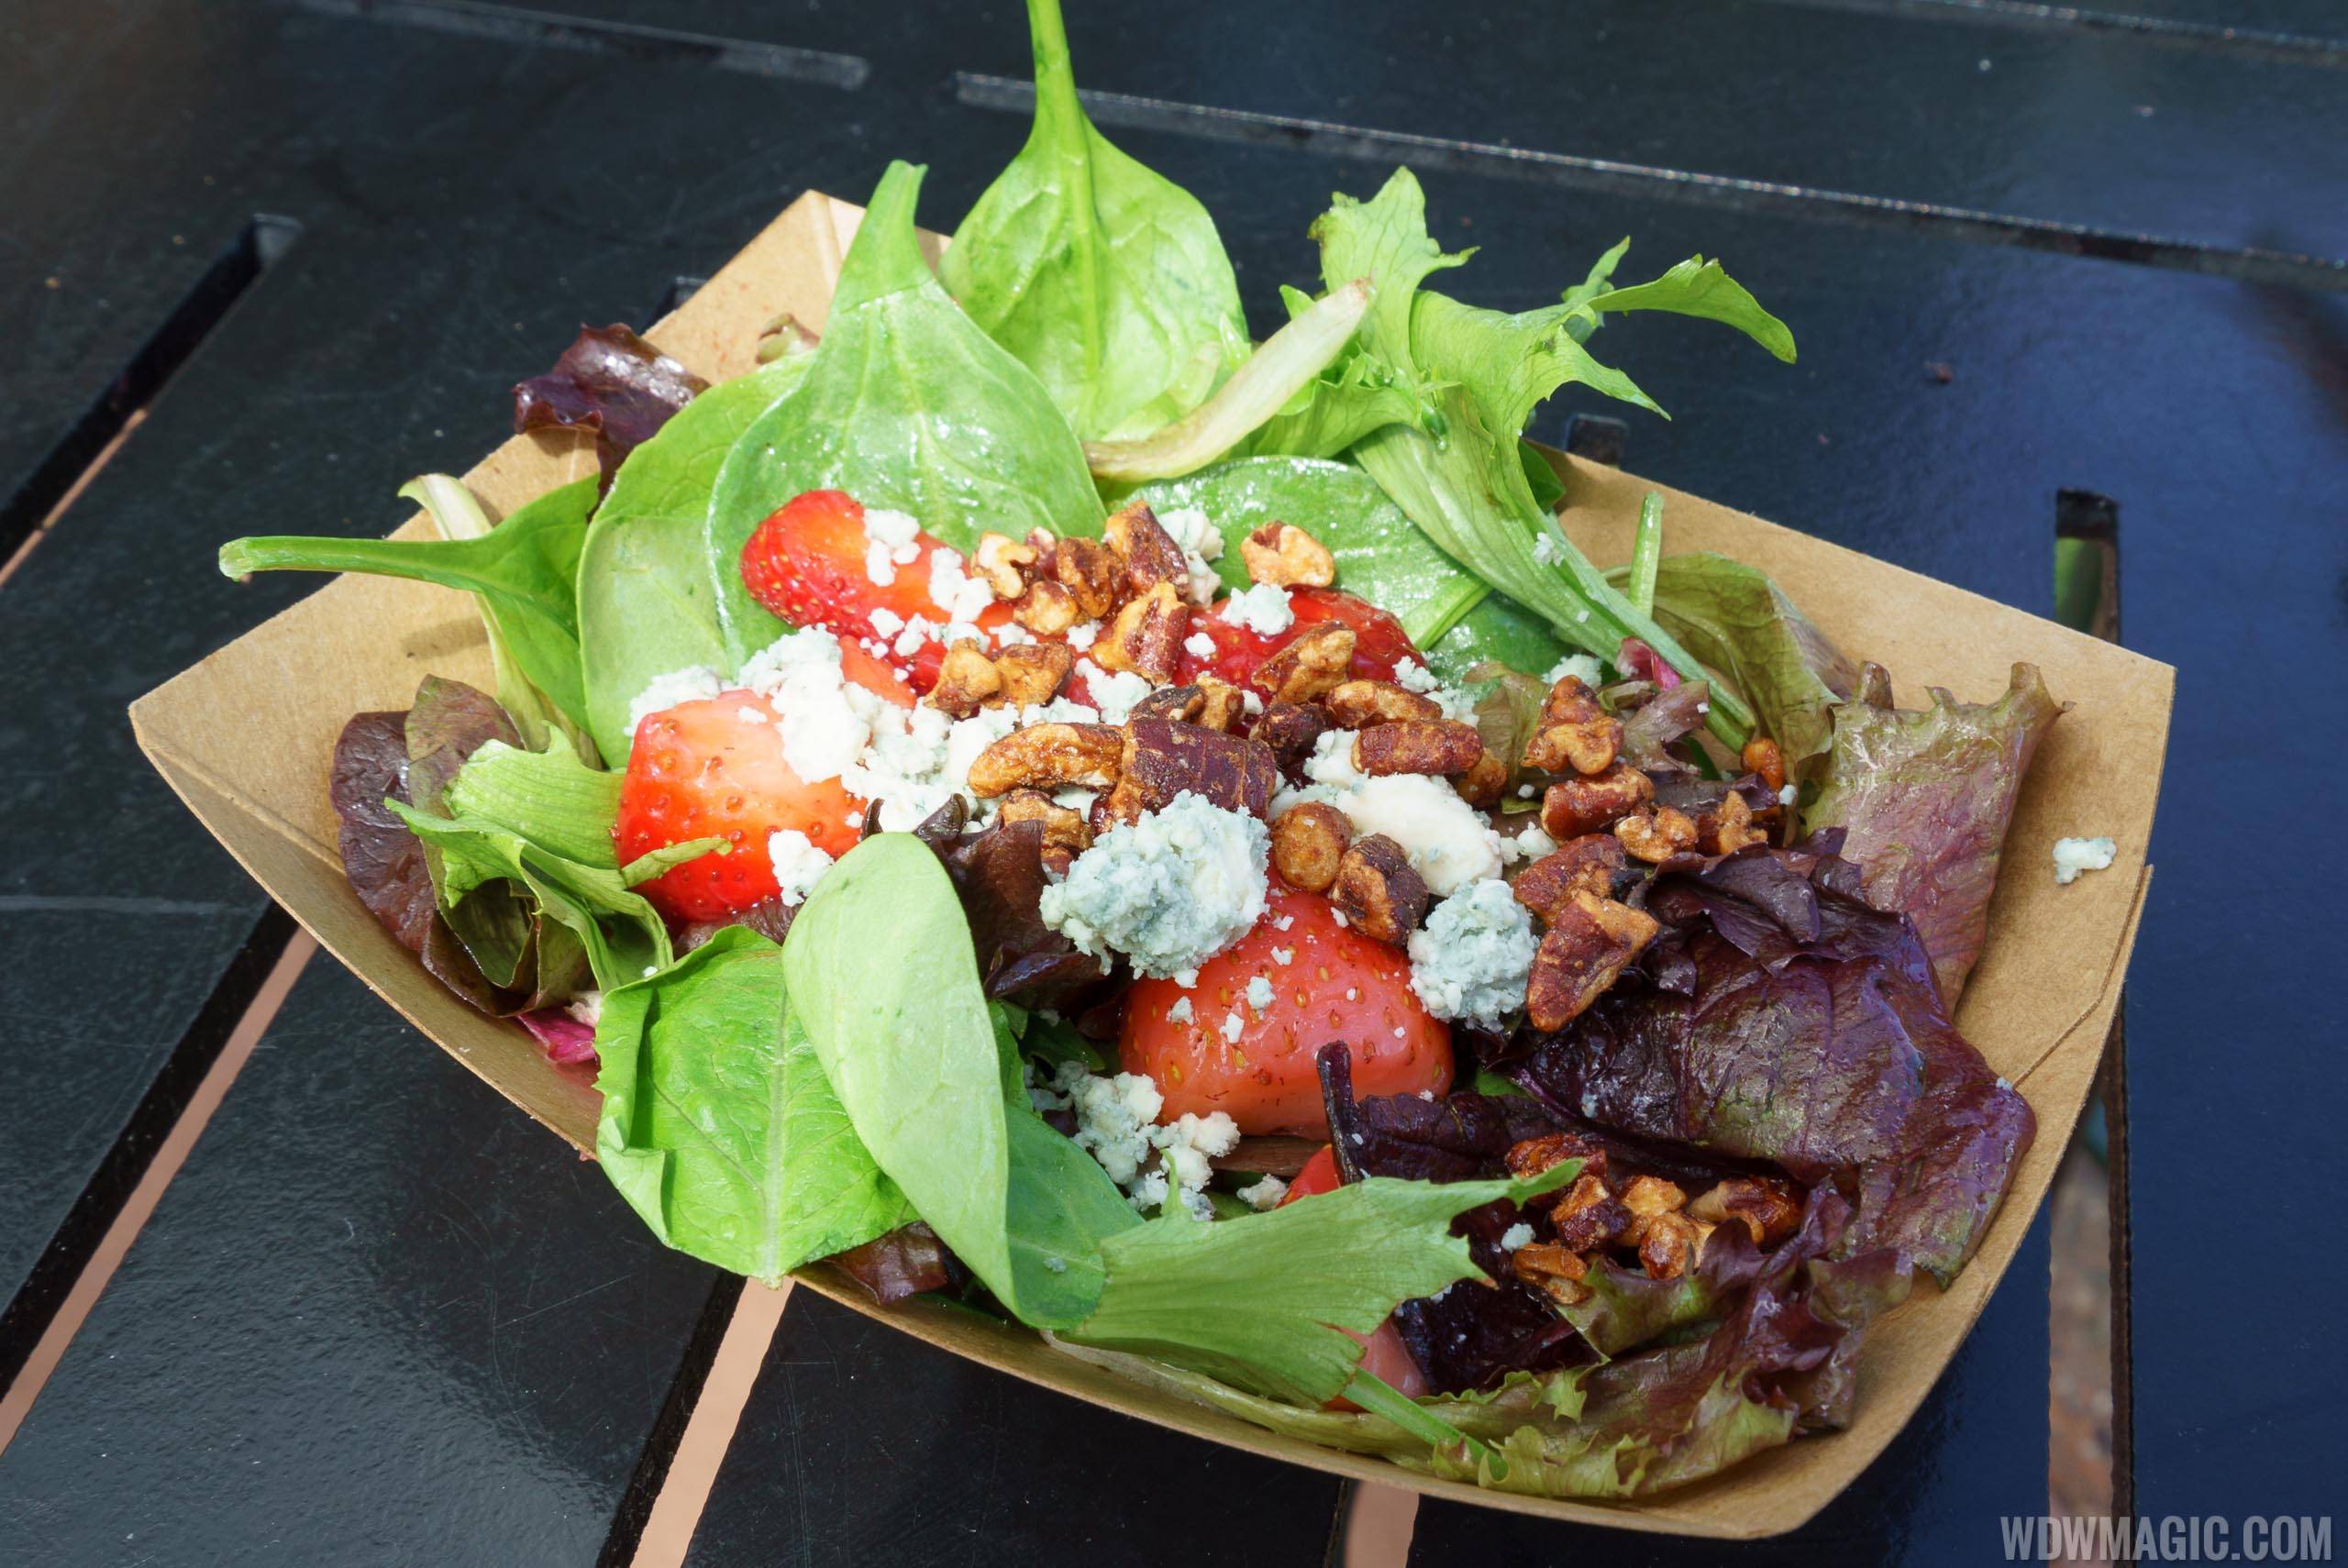 The Berry Basket - Field Greens with Fresh Strawberries, Blue Cheese, Strawberry Vinaigrette and Spiced Pecans